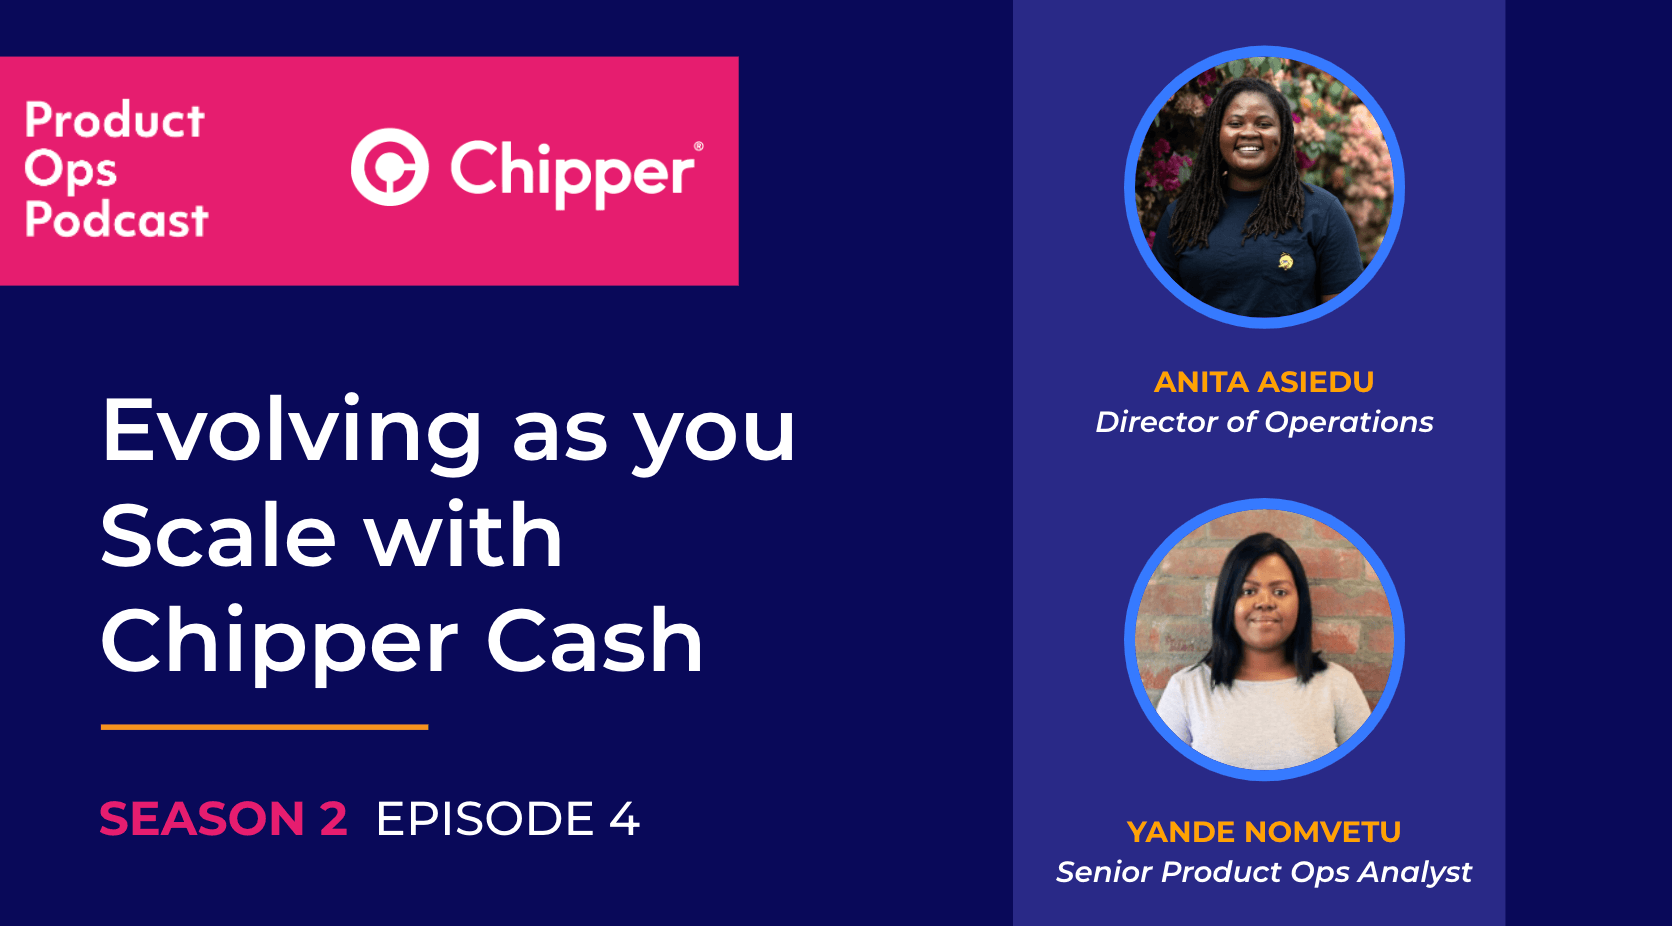 Evolving as you scale, with Chipper Cash